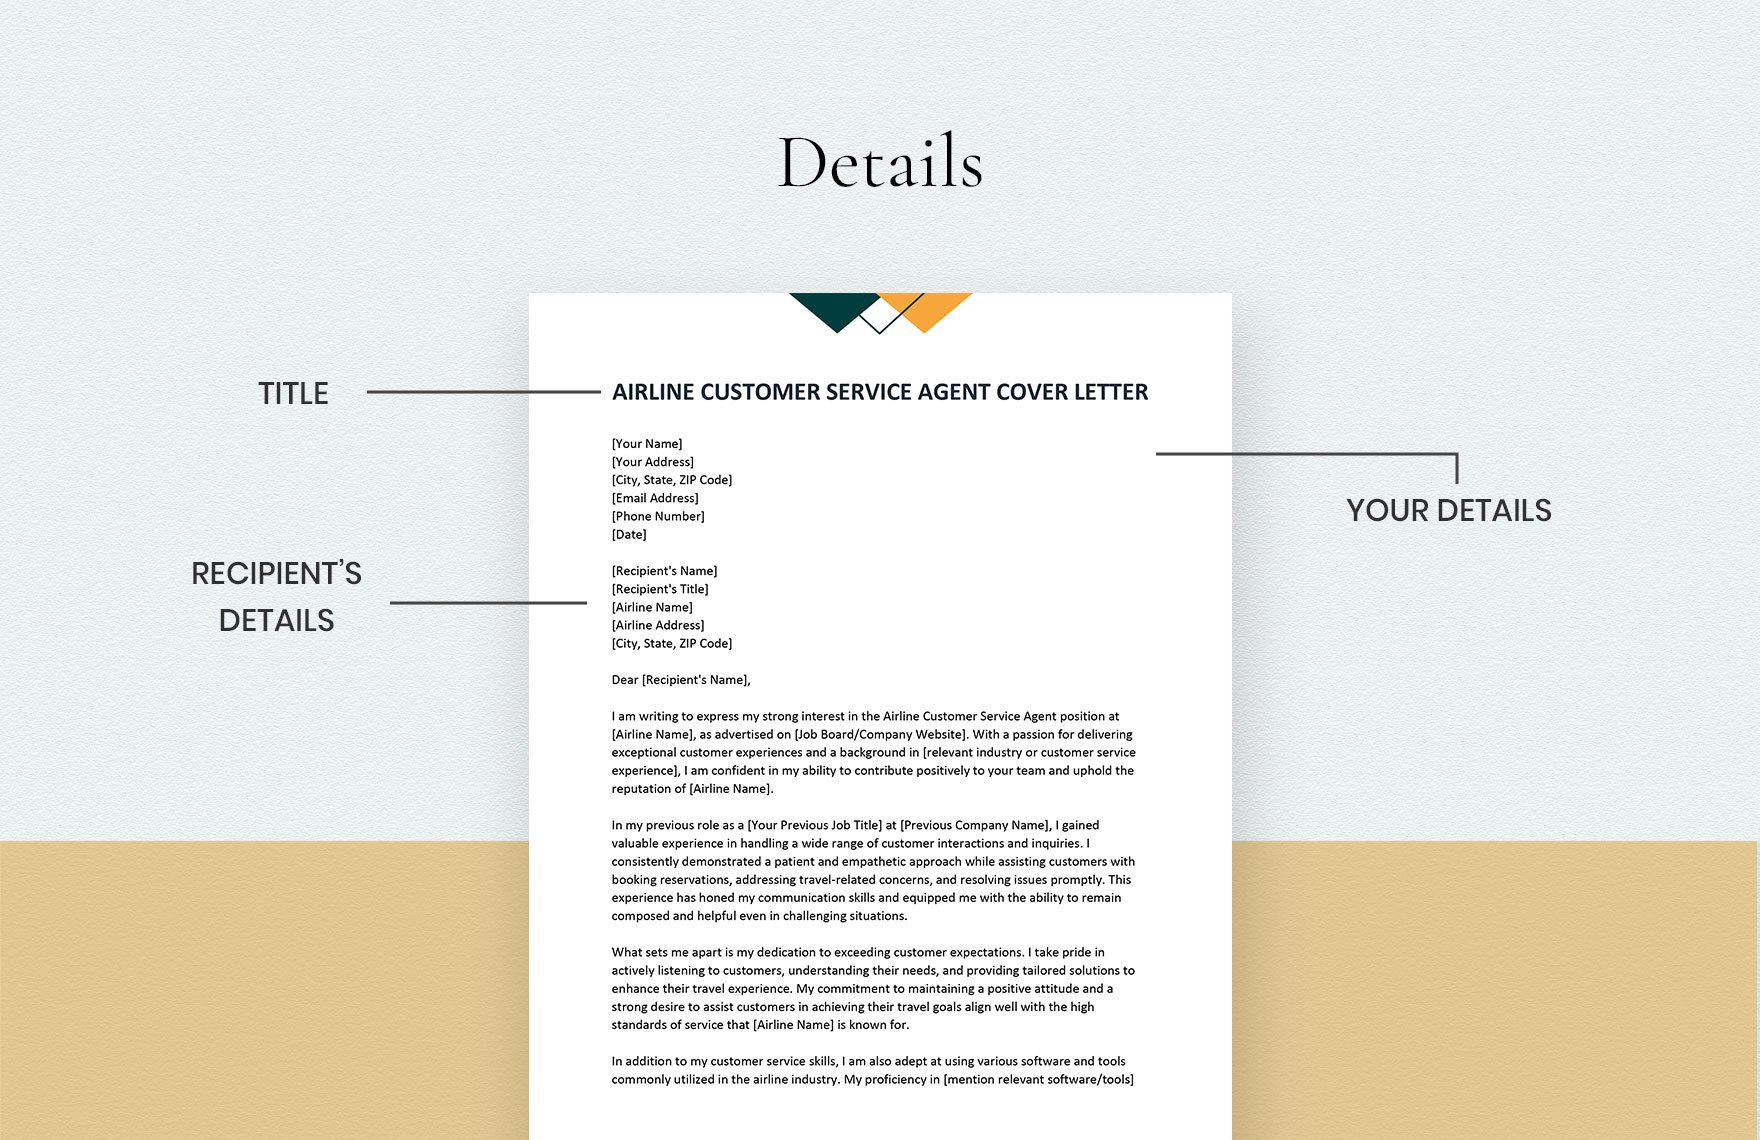 Airline Customer Service Agent Cover Letter